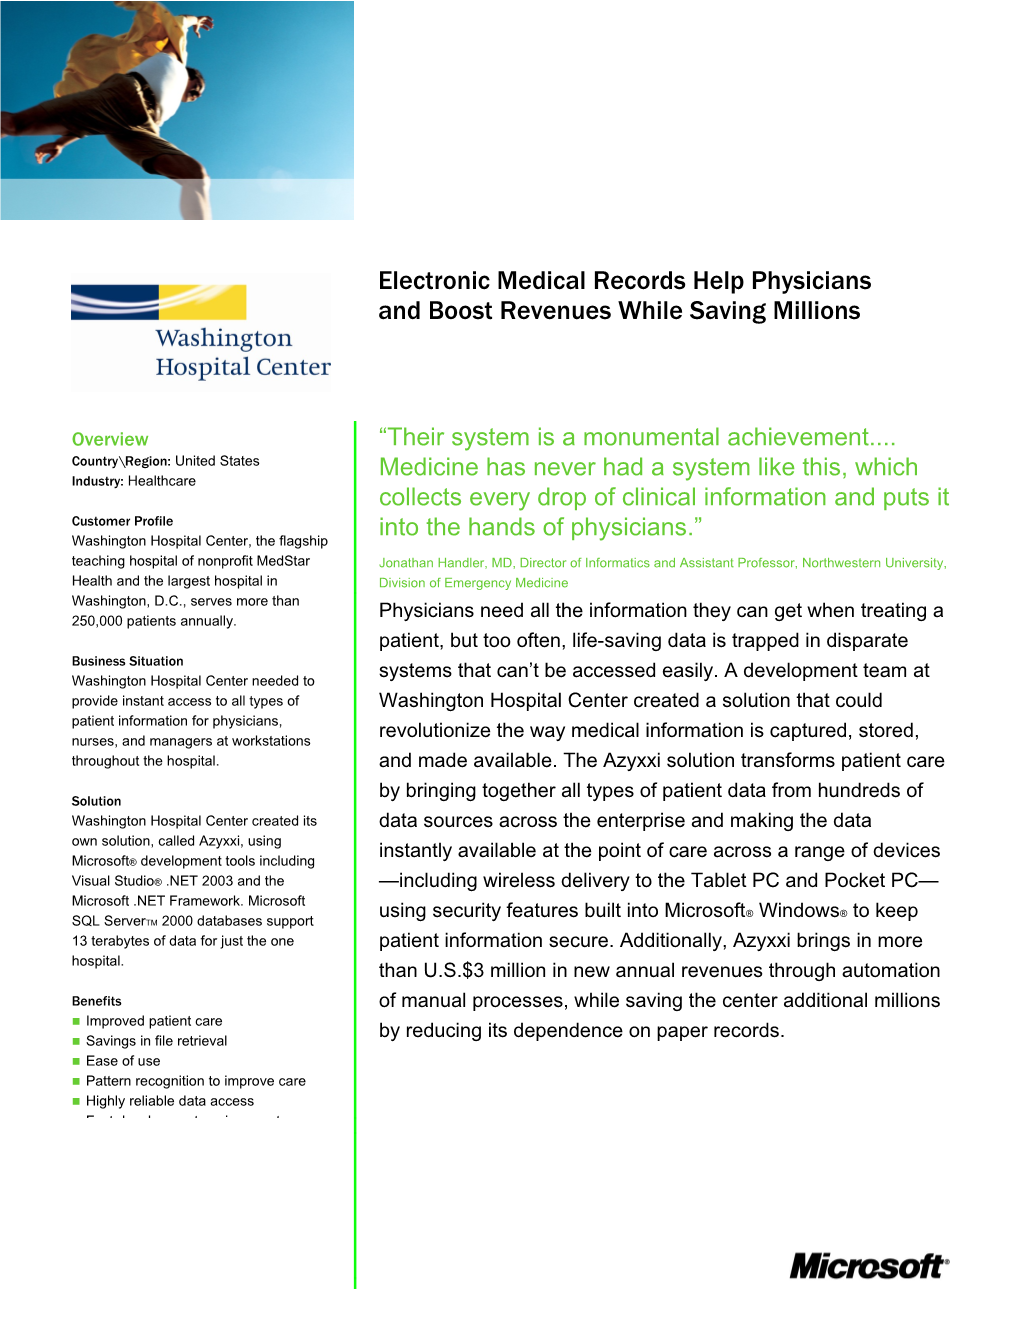 Electronic Medical Records Help Physicians and Boost Revenues While Saving Millions